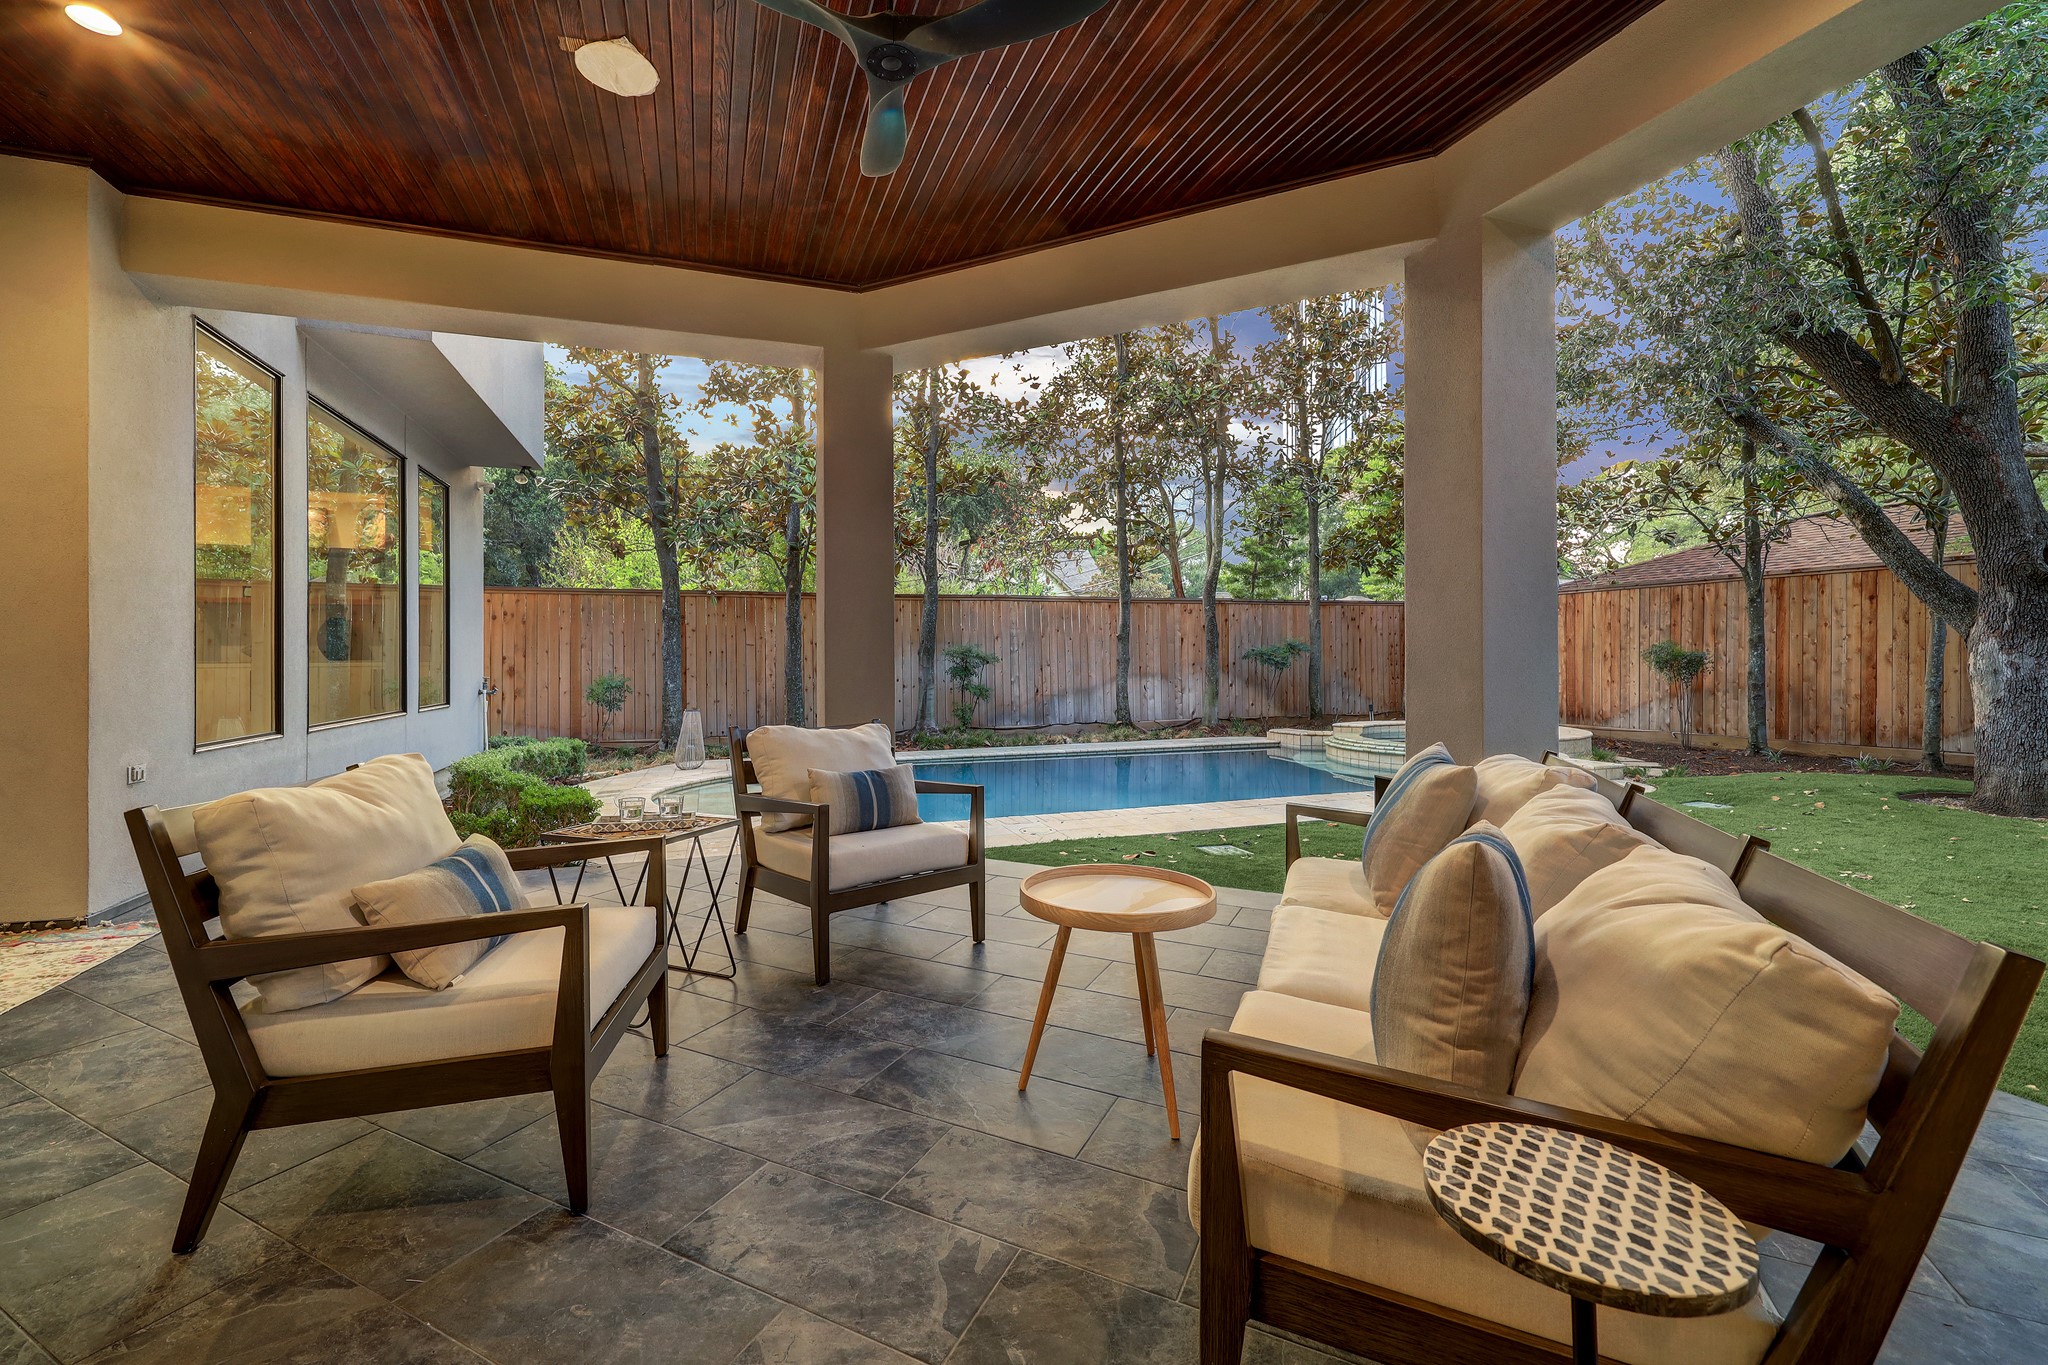 Generous covered patio for grilling out or just relaxing pool side.